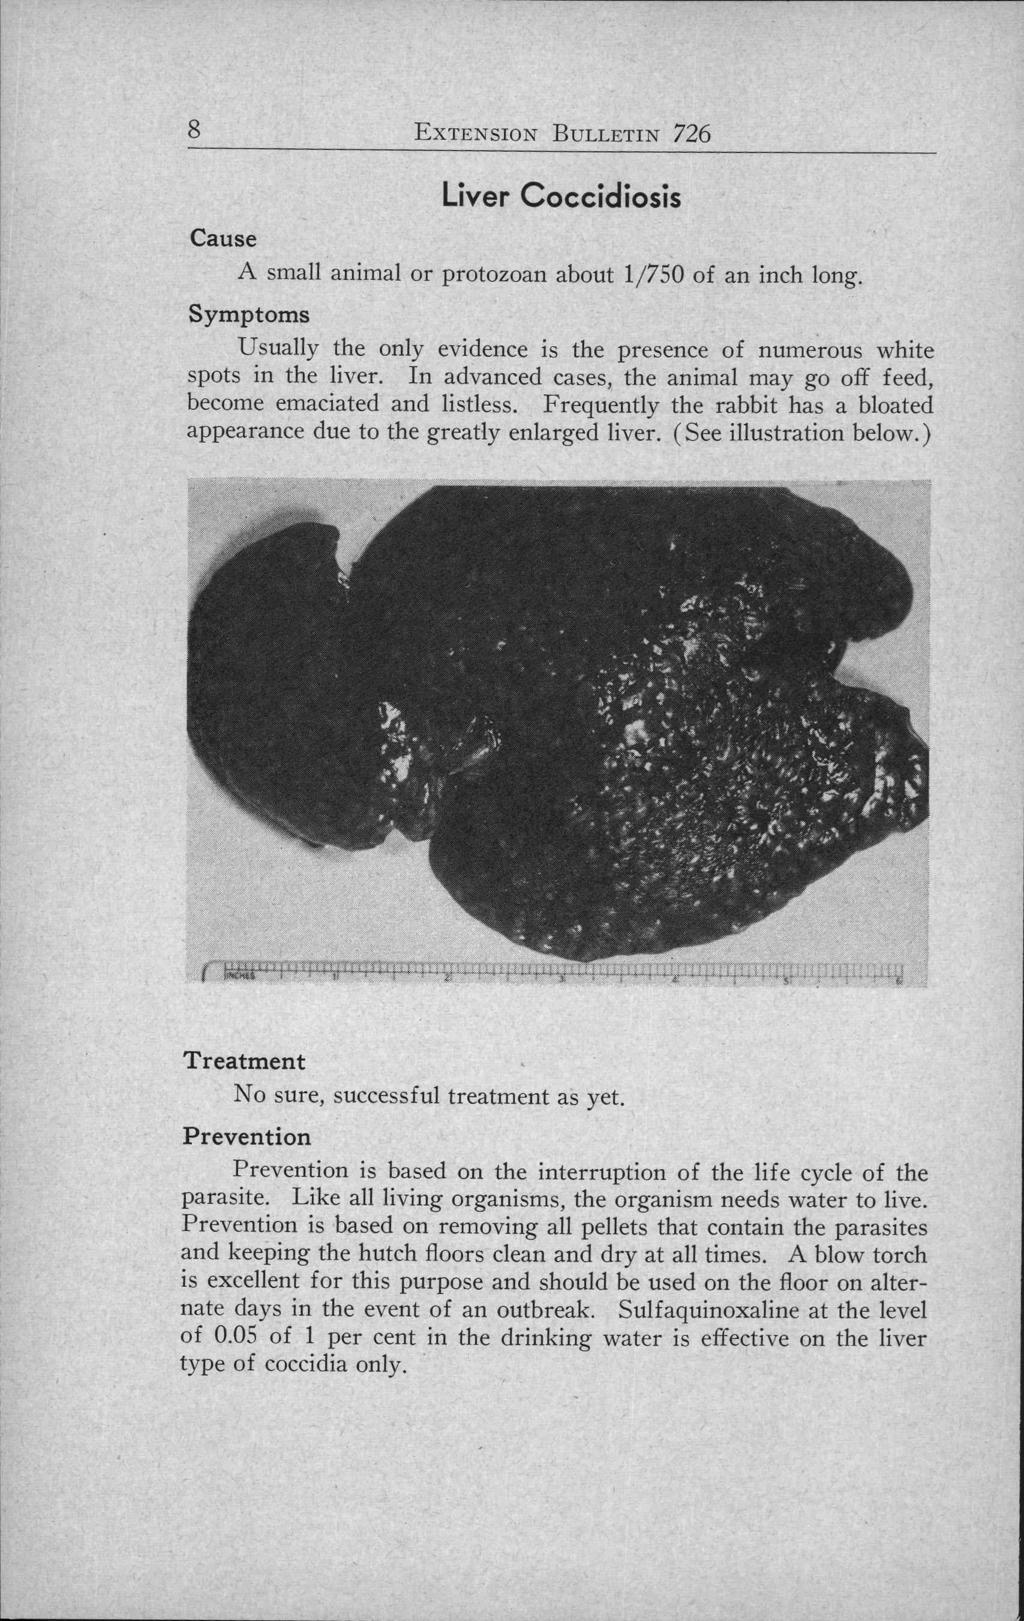 8 EXTENSION BULLETIN 726 Liver Coccidiosis A small animal or protozoan about 1/750 of an inch long. Usually the only evidence is the presence of numerous white spots in the liver.